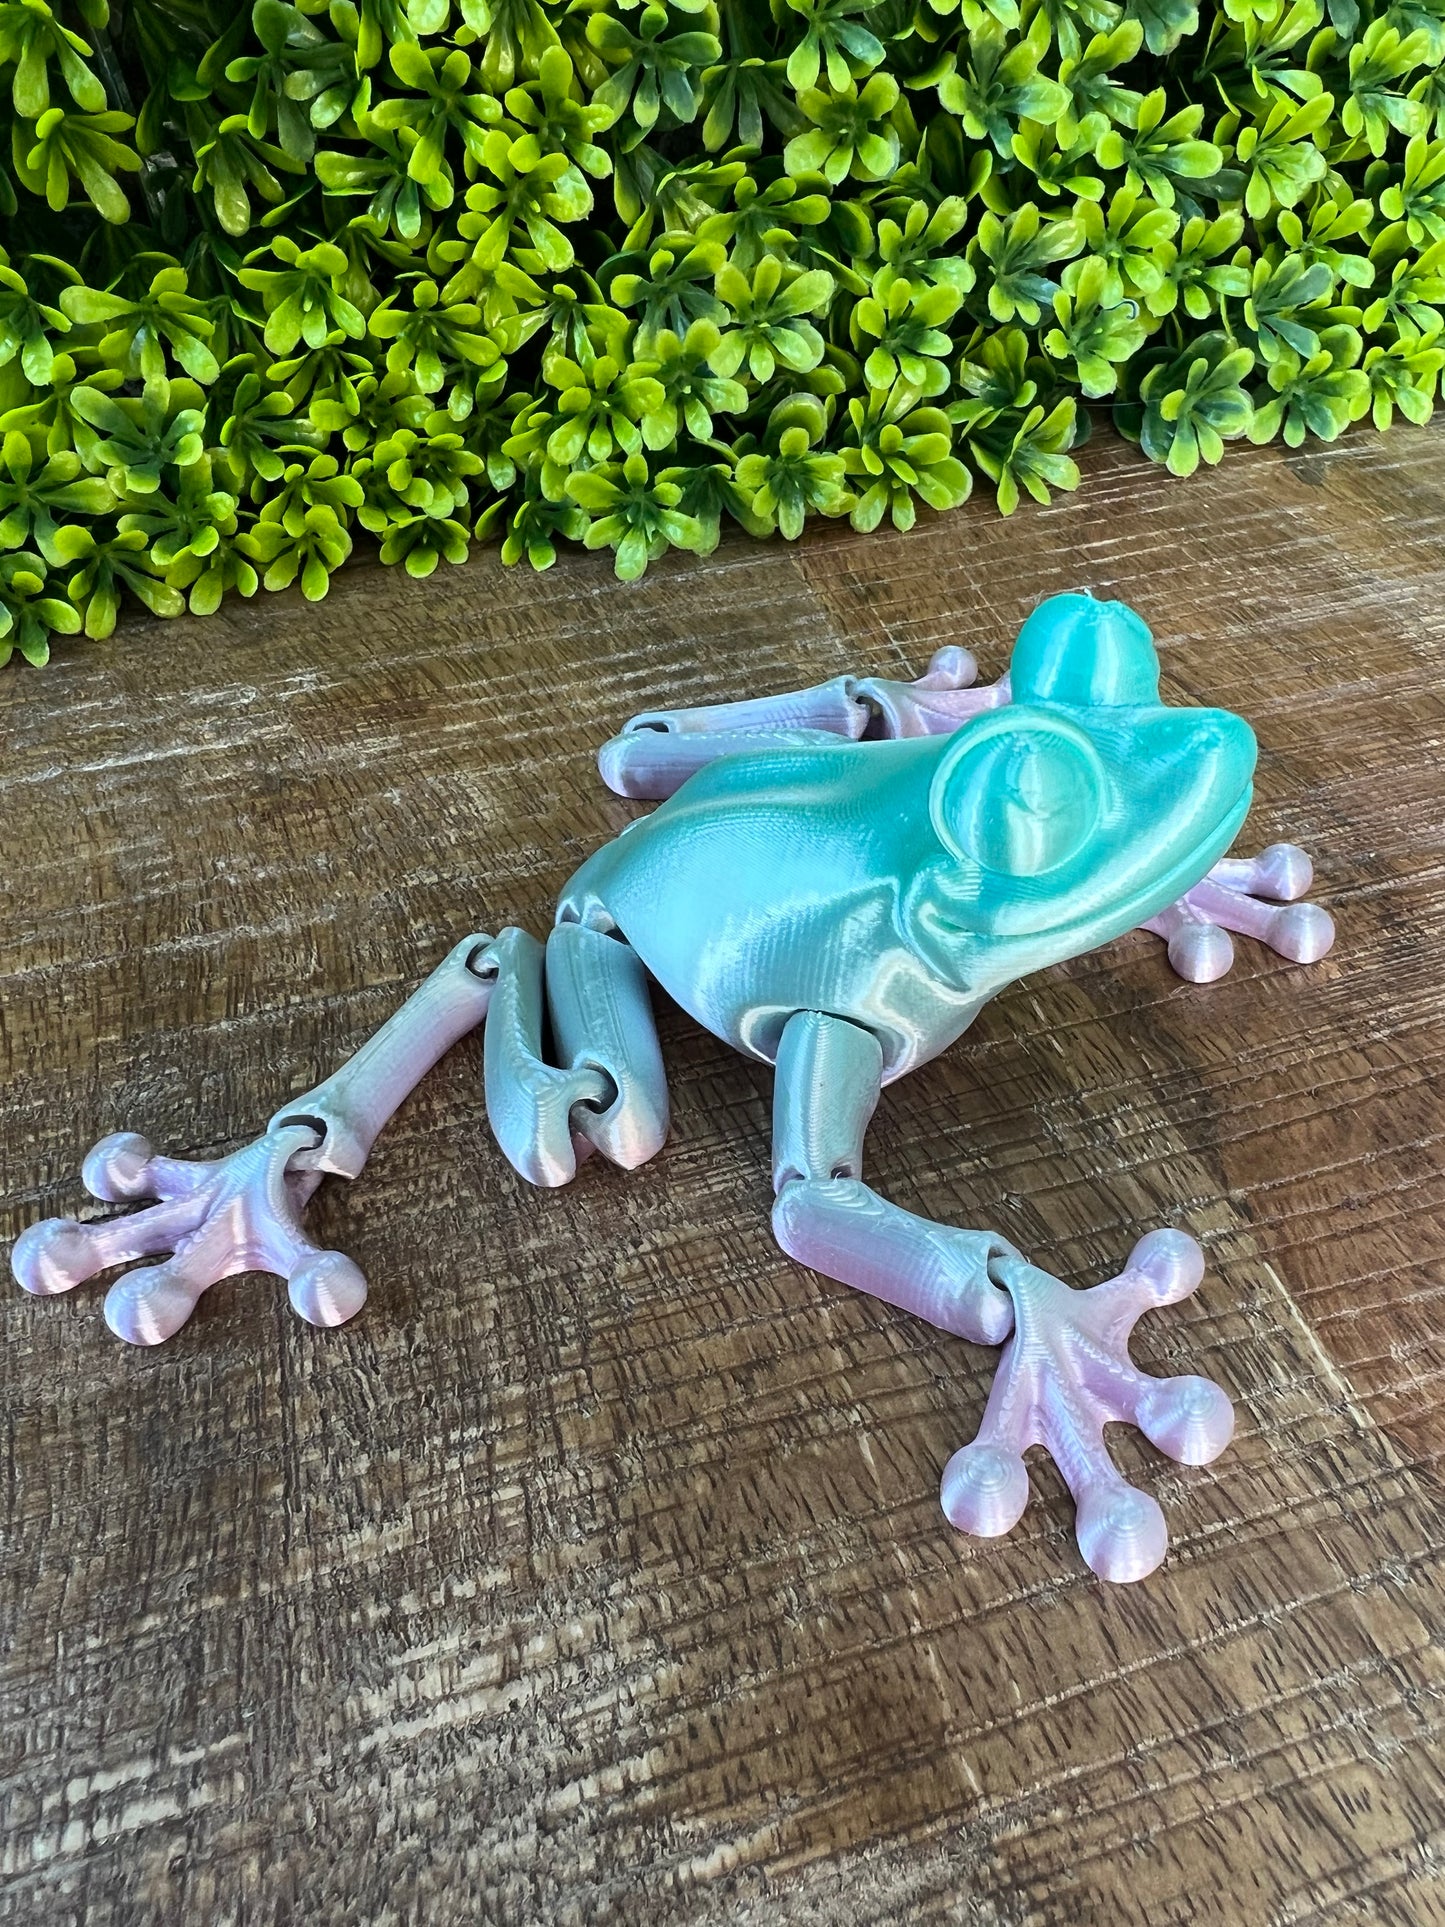 Frog | 3d Printed | Custom Articulated Flexible Toy